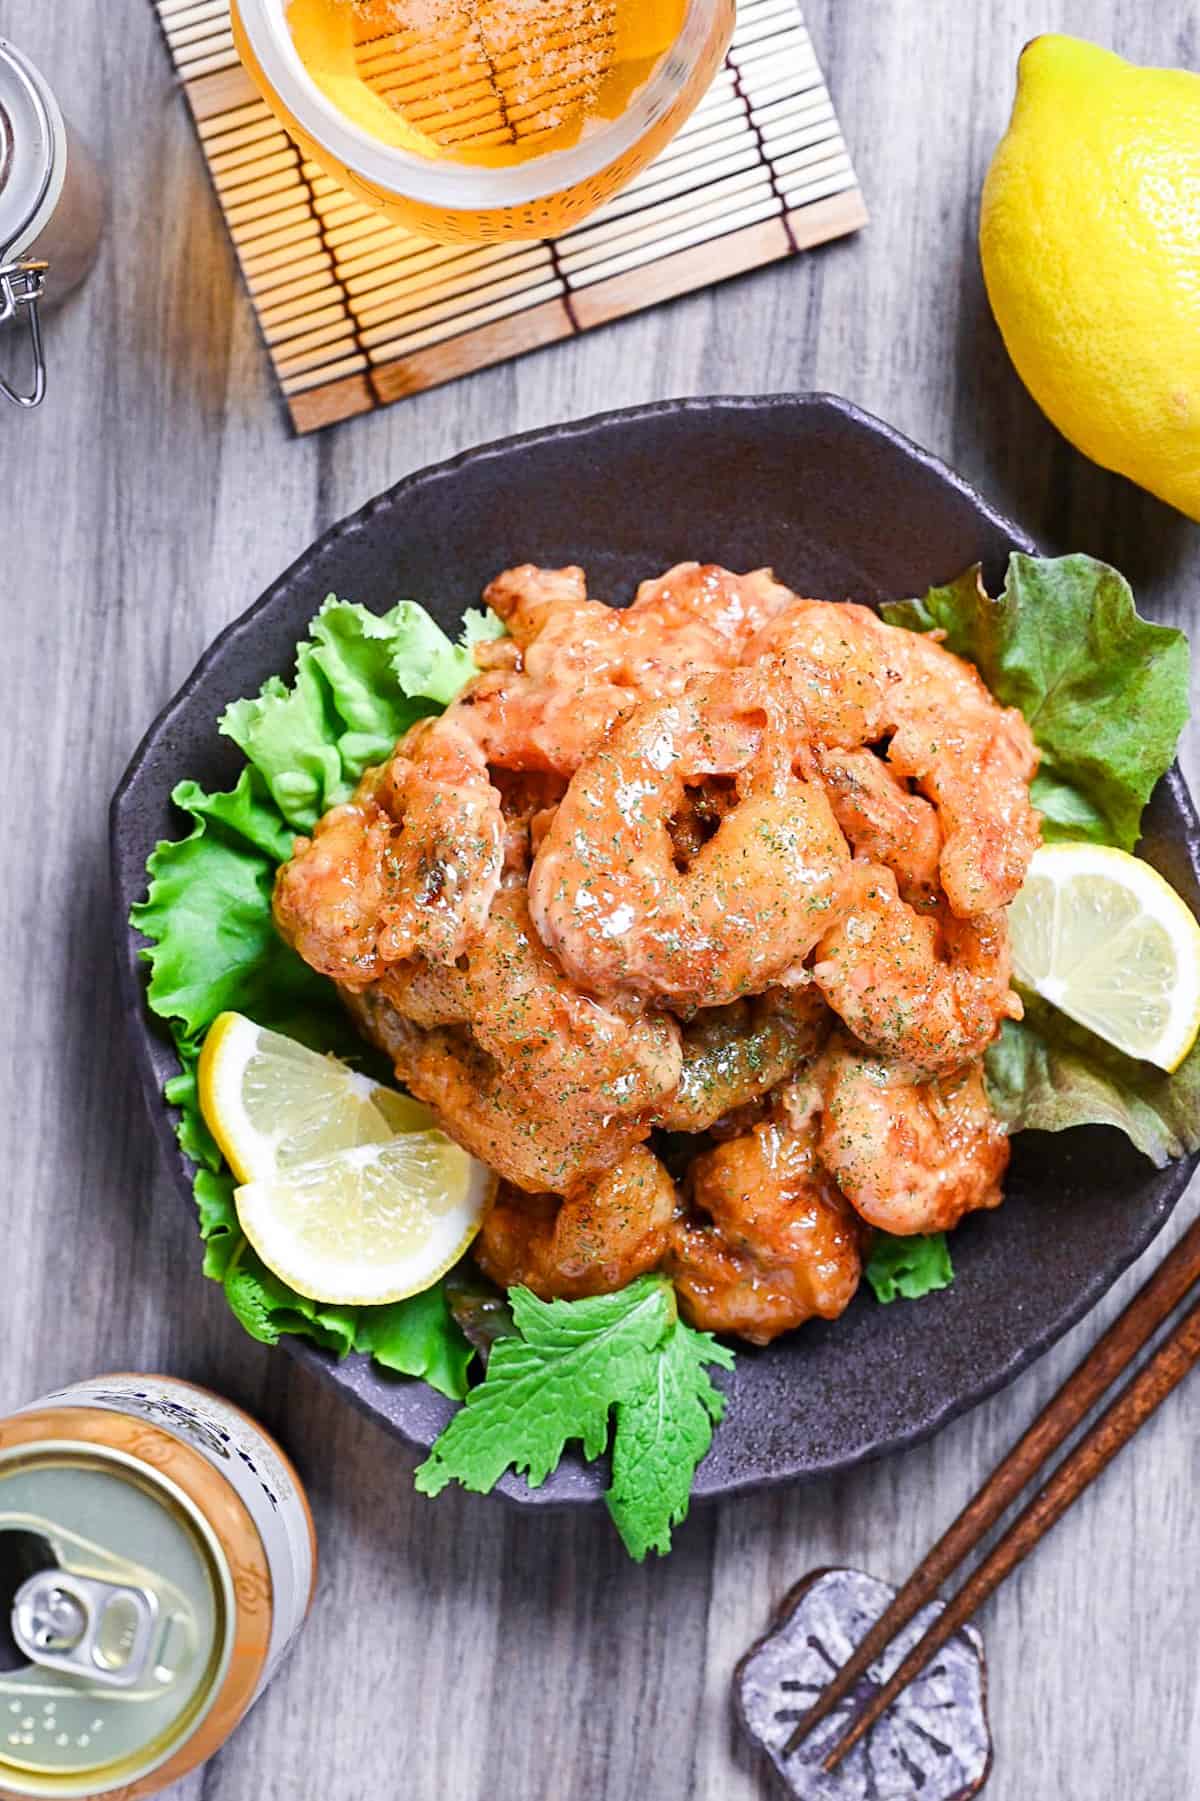 Ebi Mayo (Fried Shrimp in Mayonnaise Sauce) on a brown plate with salad and lemon wedges